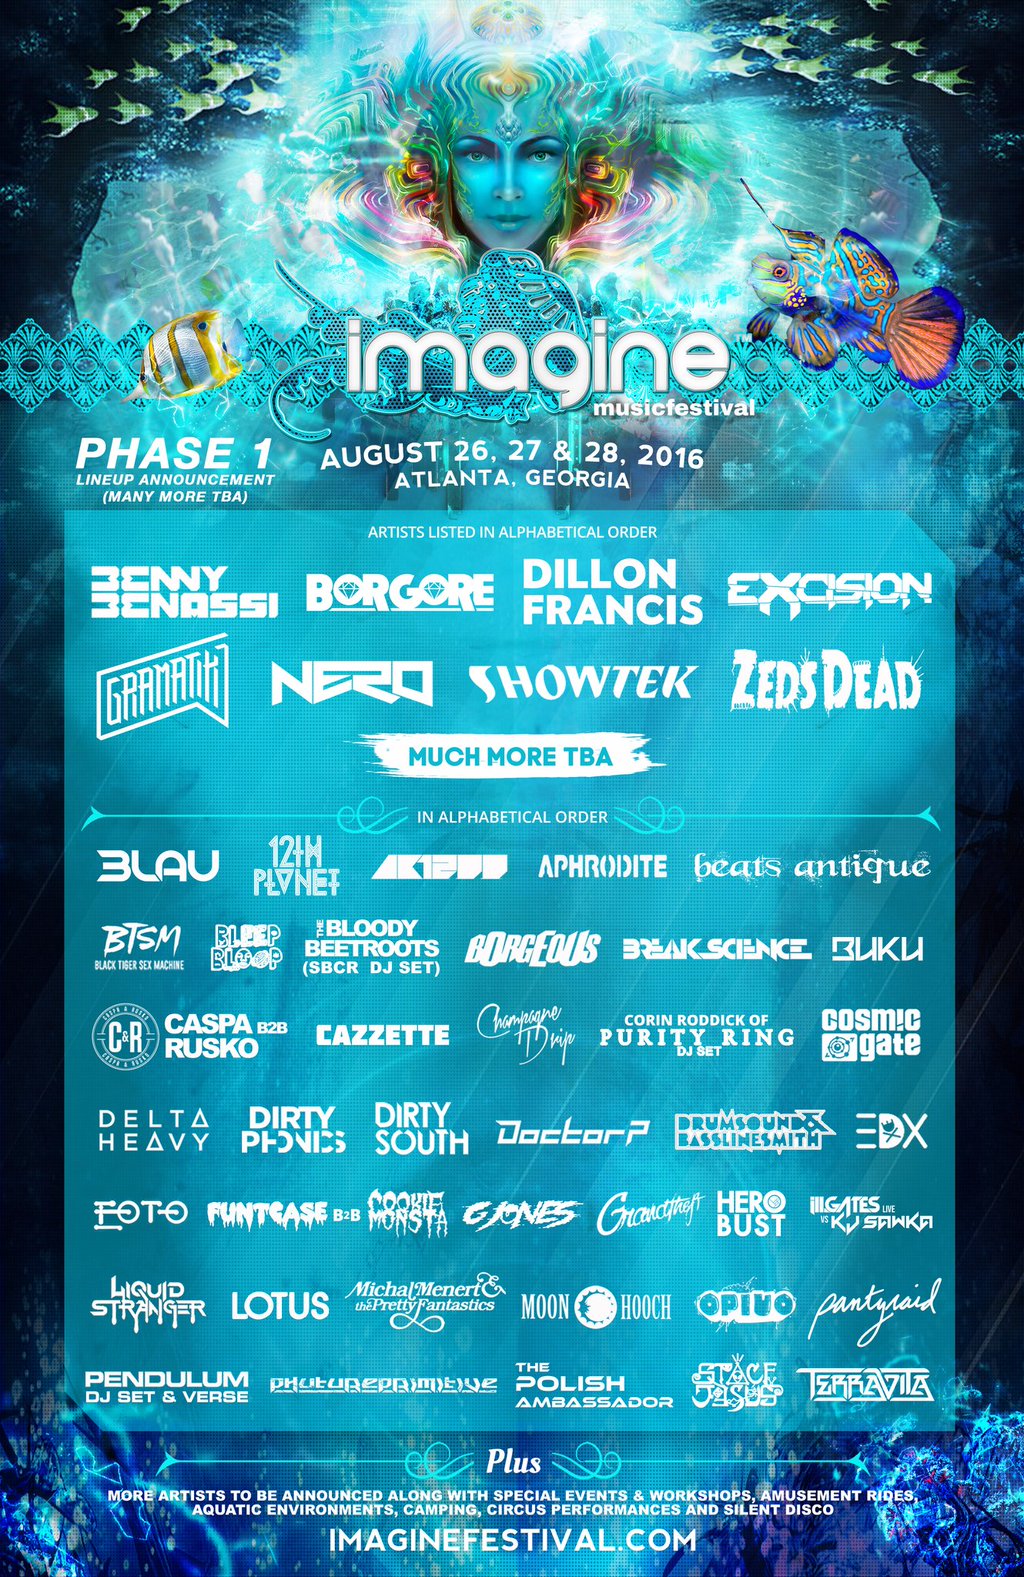 Imagine Music Festival phase 1 lineup. Photo by: Imagine Music Festival